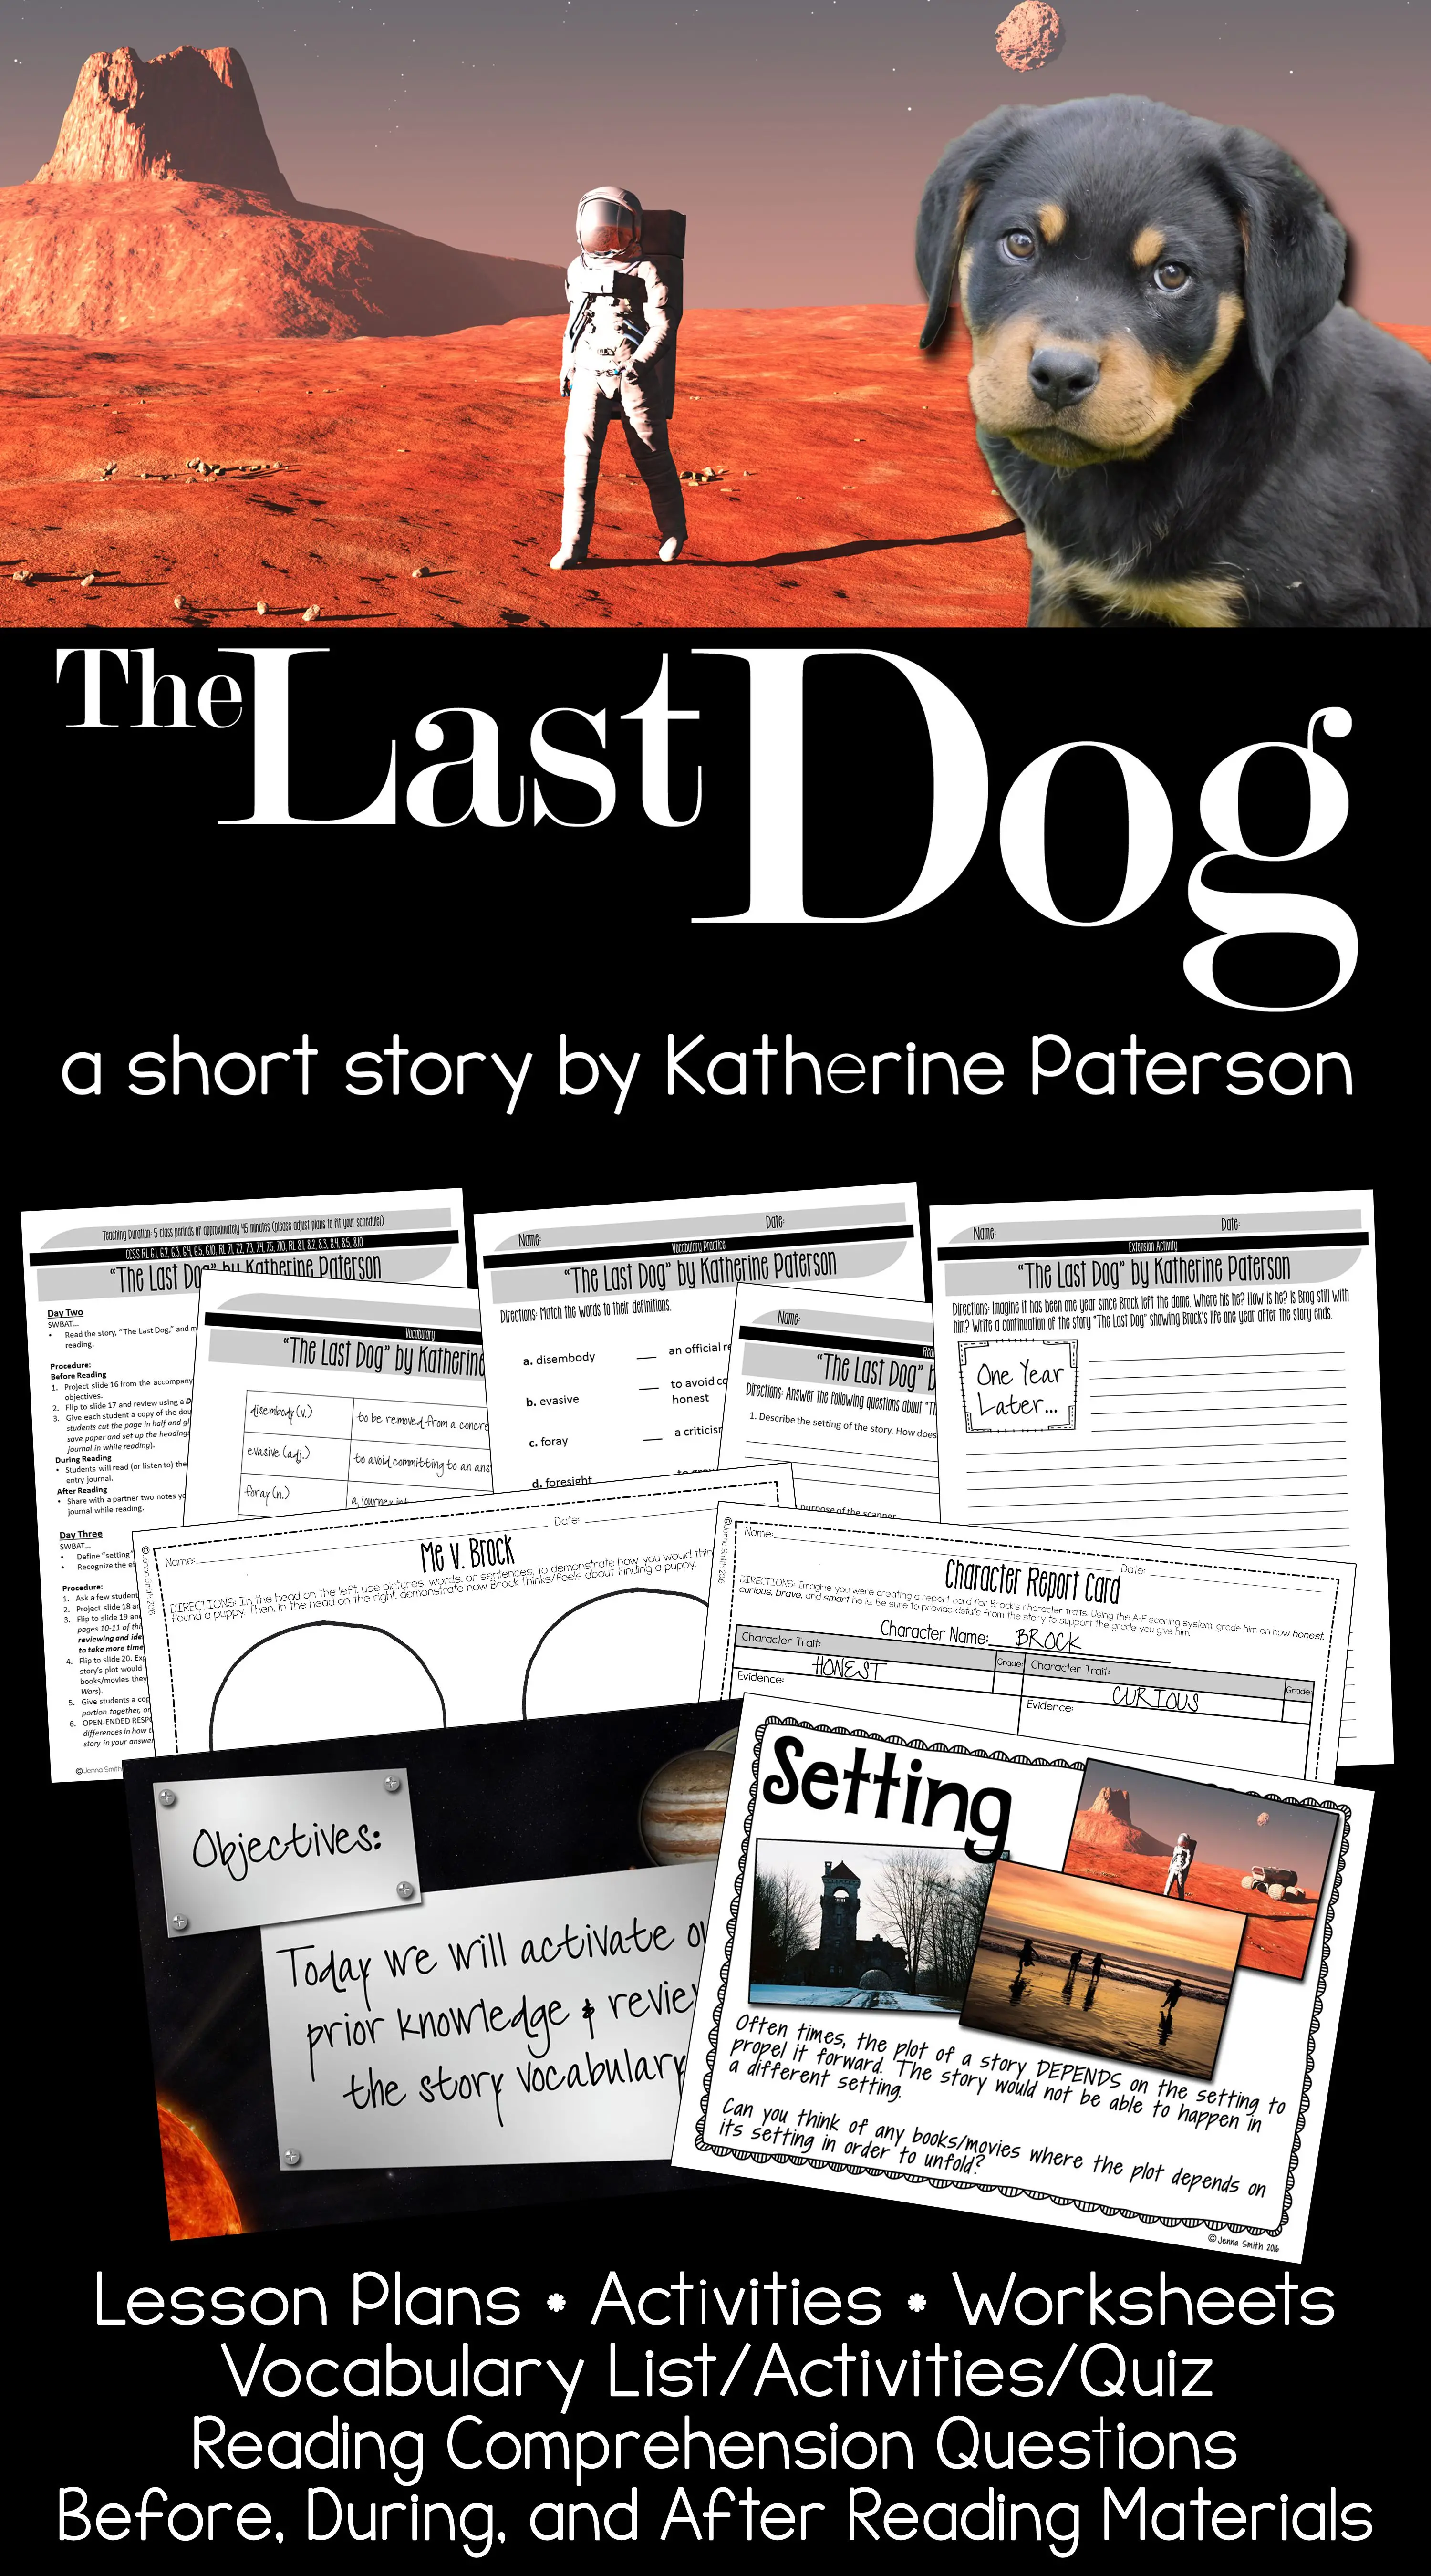 Discover the Heartwarming Tale of The Last Dog by Katherine Paterson